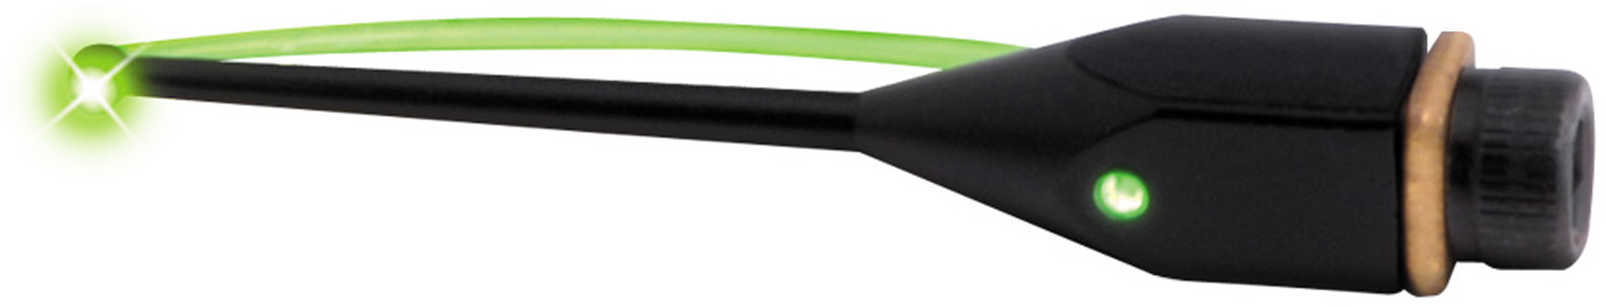 TruGlo Pro Dot Replacement Pin Green .019 Model: TG841G